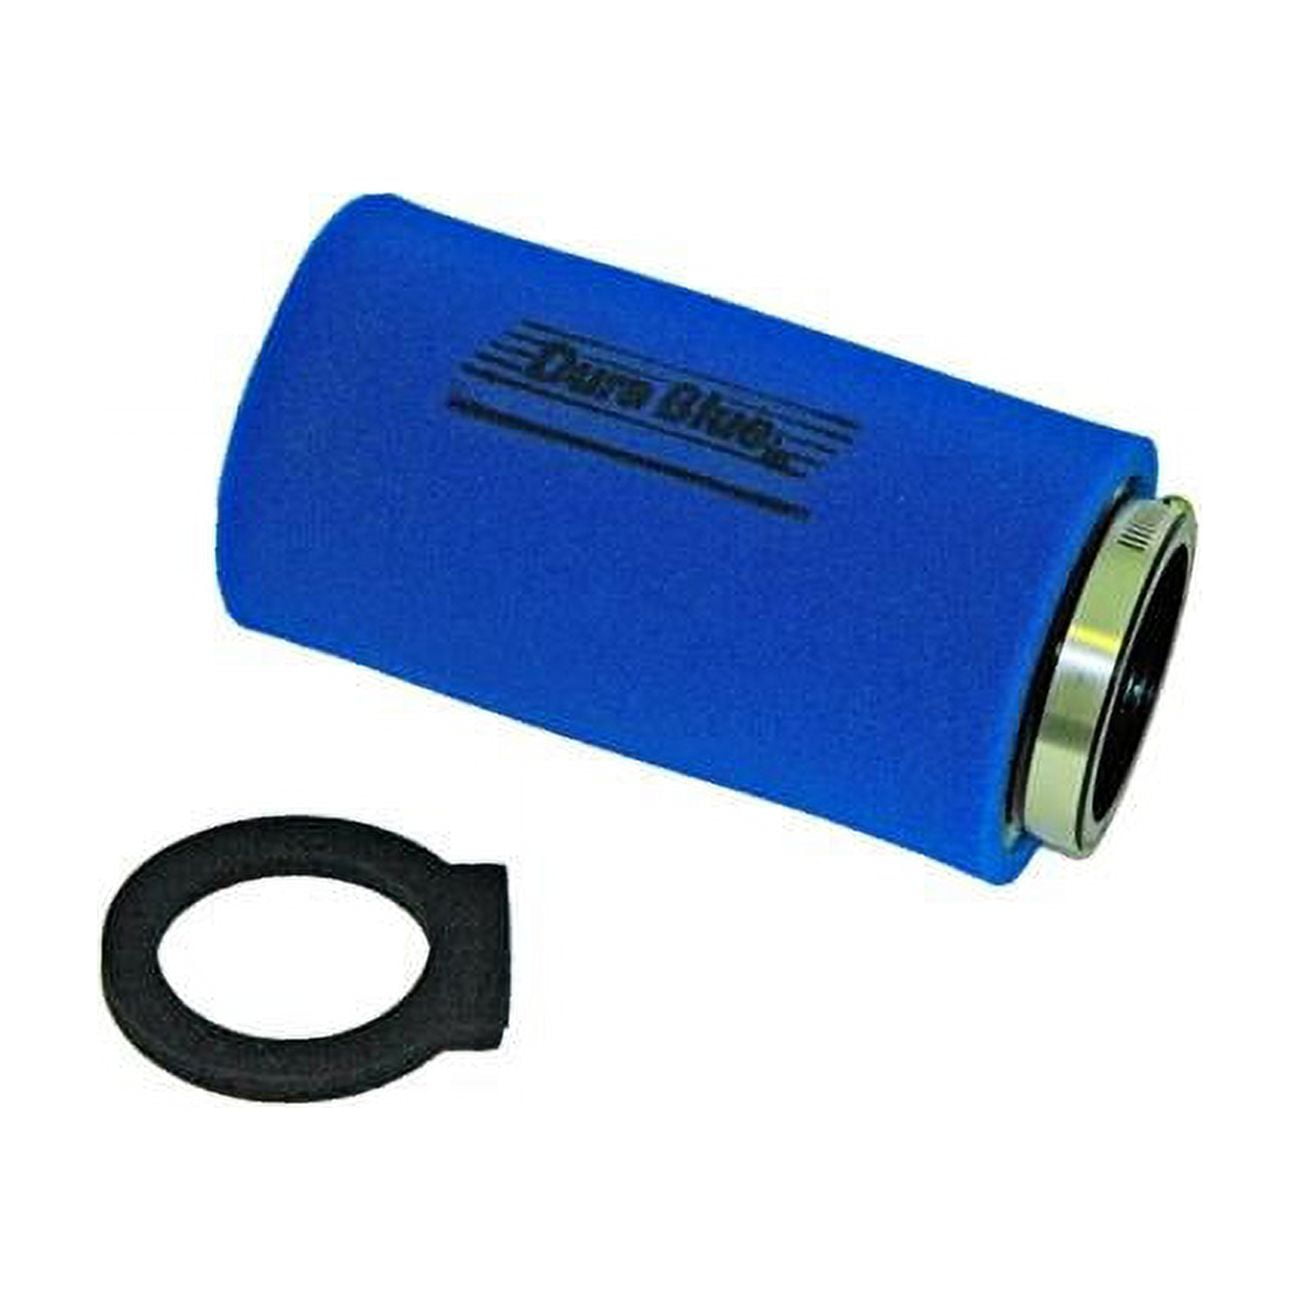 Picture of Durablue 1955 Air Filter - Power Yamaha Raptor 700 2006-2017 - Replacement Filter Only - 1955k Kit